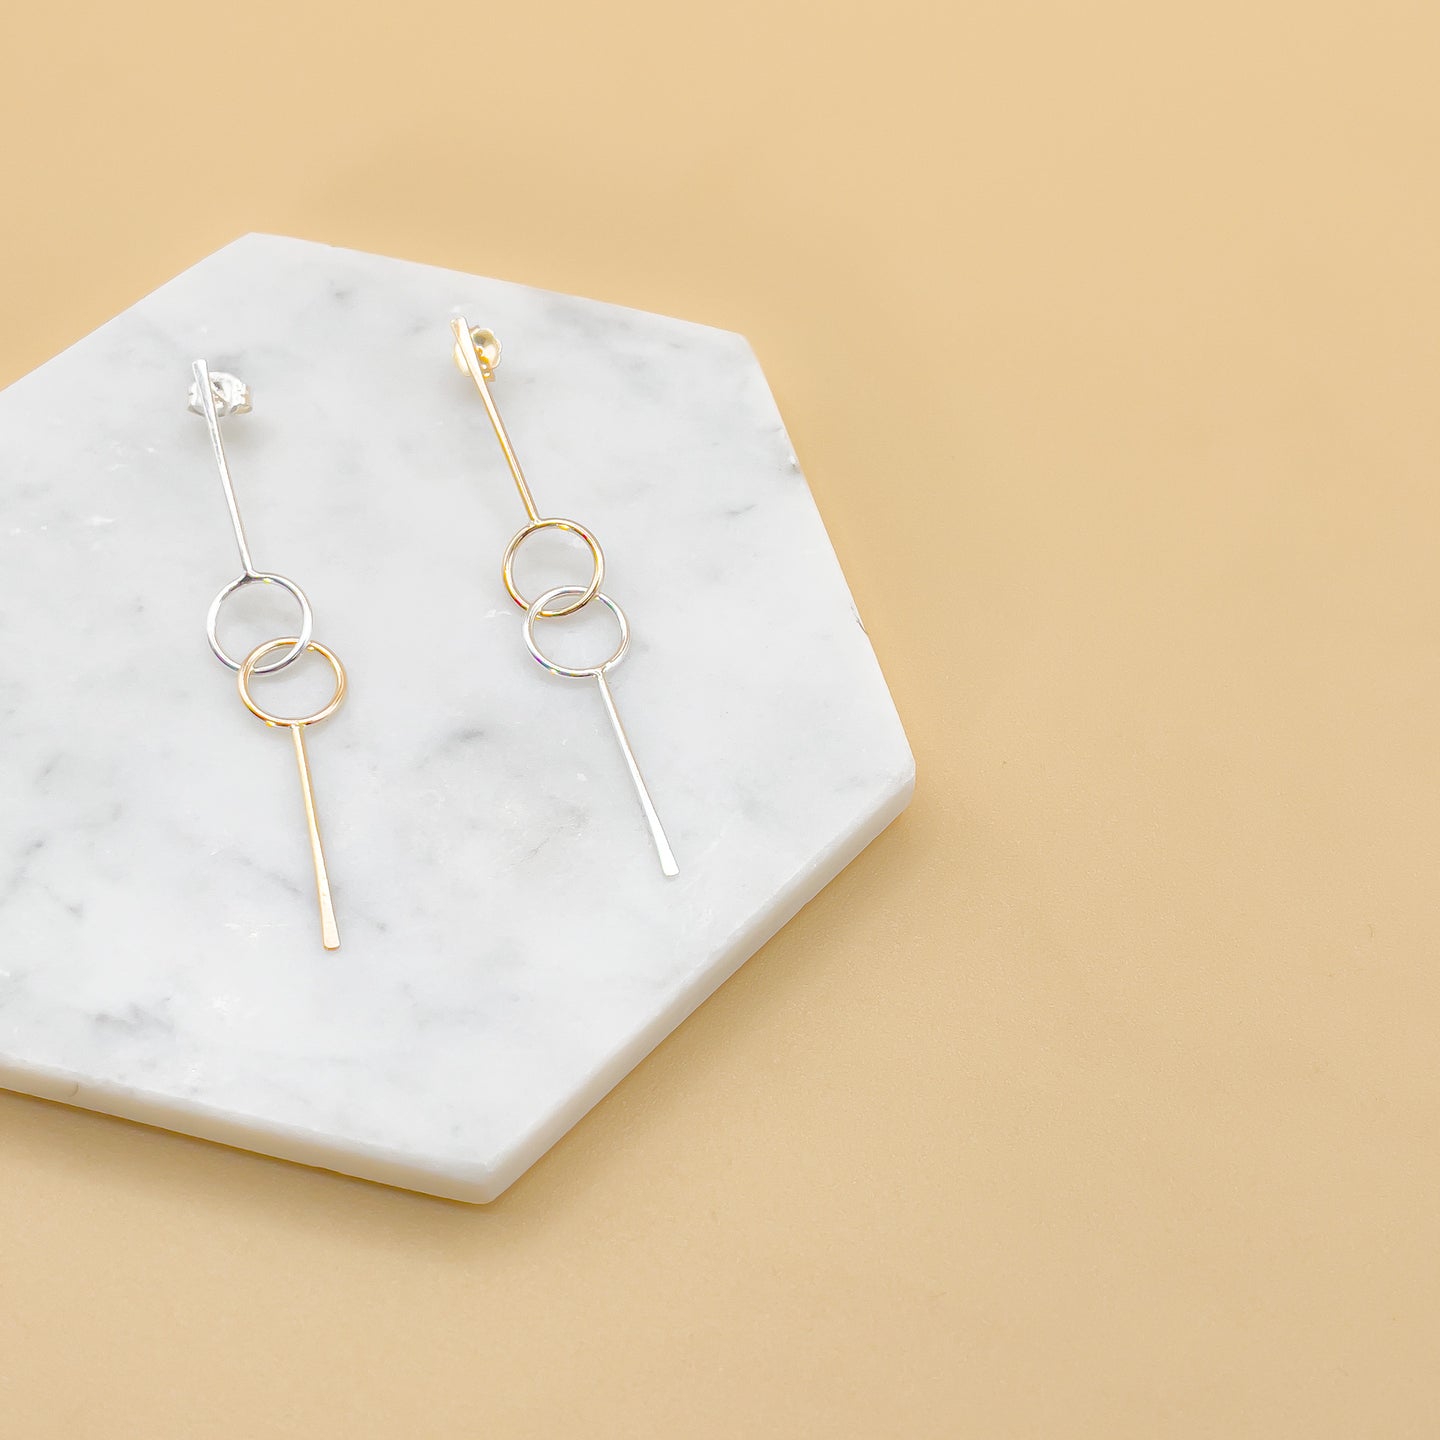 Better Together Earrings